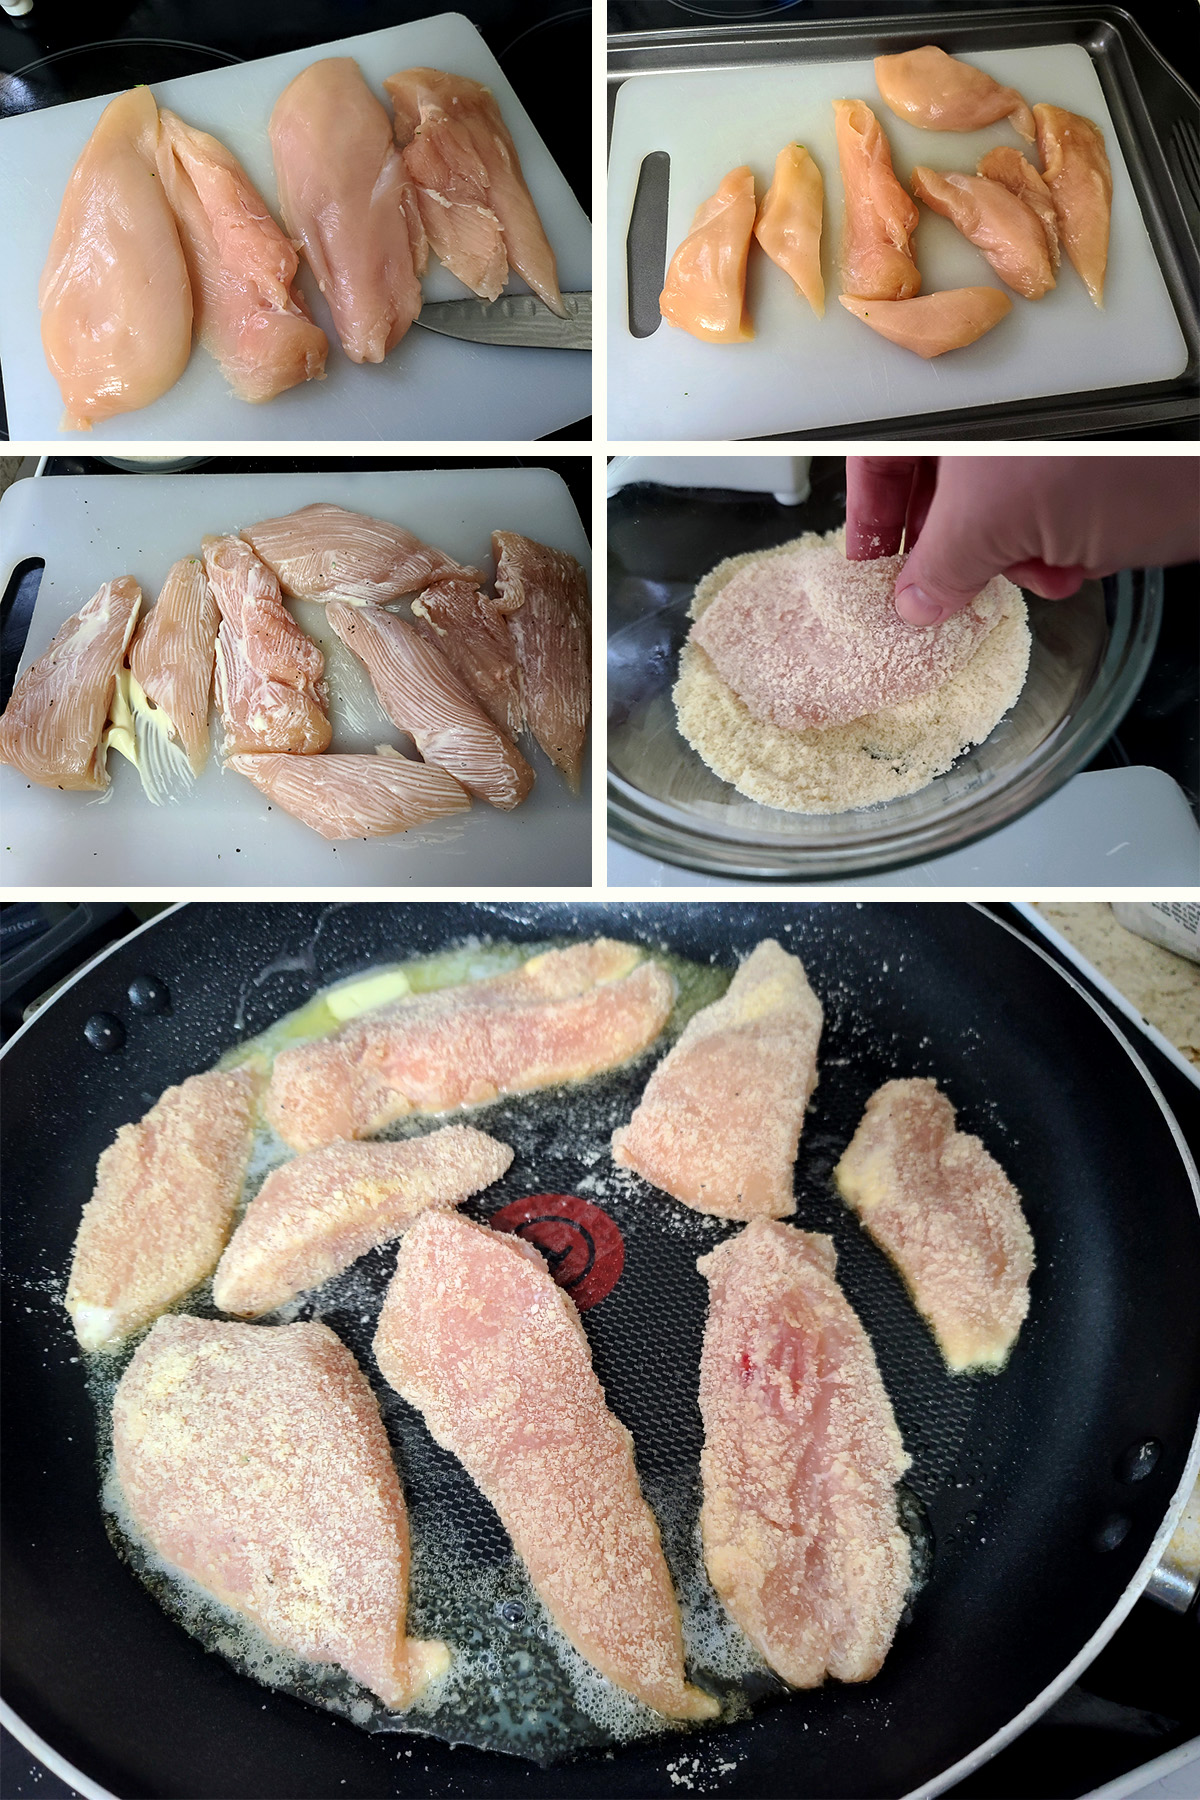 A 5 part image showing the chicken being cut, breaded, and added to the pan, as described in the post.